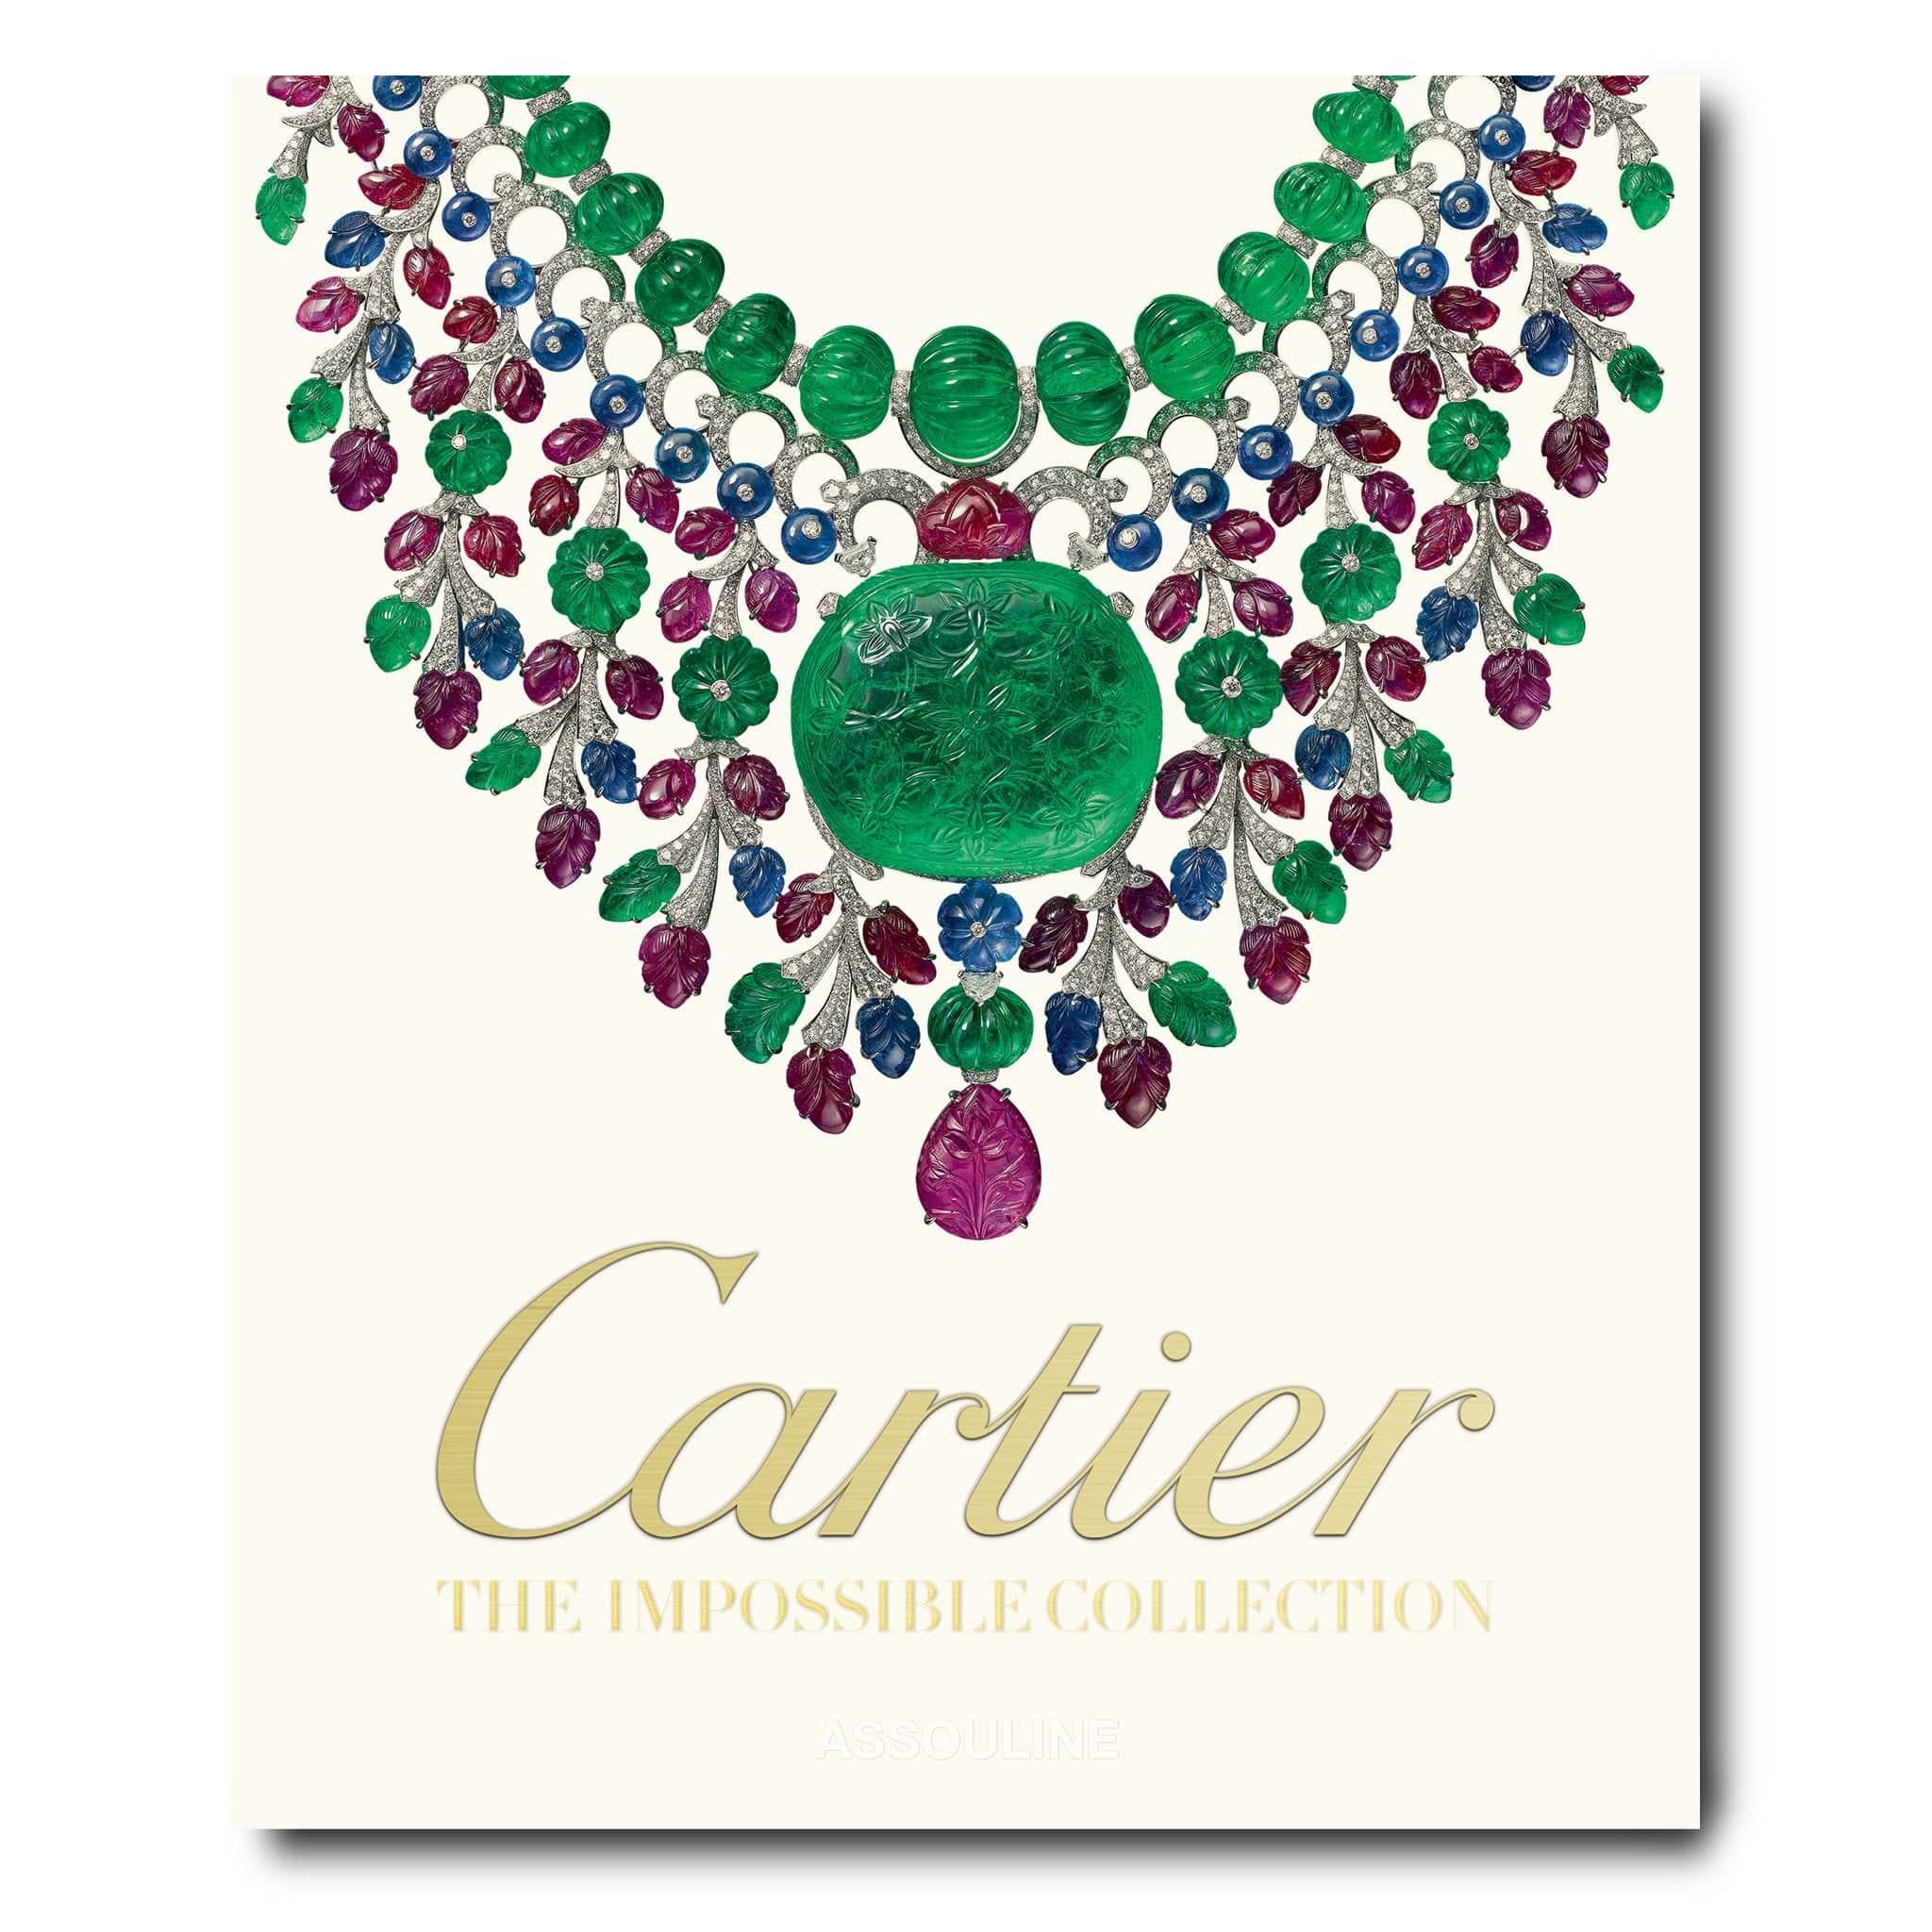 One of the world’s premier luxury jewelers since the nineteenth century, Cartier evokes a world of artistry and beauty, a legacy of unequaled prestige. By 1909, Cartier was the first international jeweler of its time, with boutiques in Paris, London